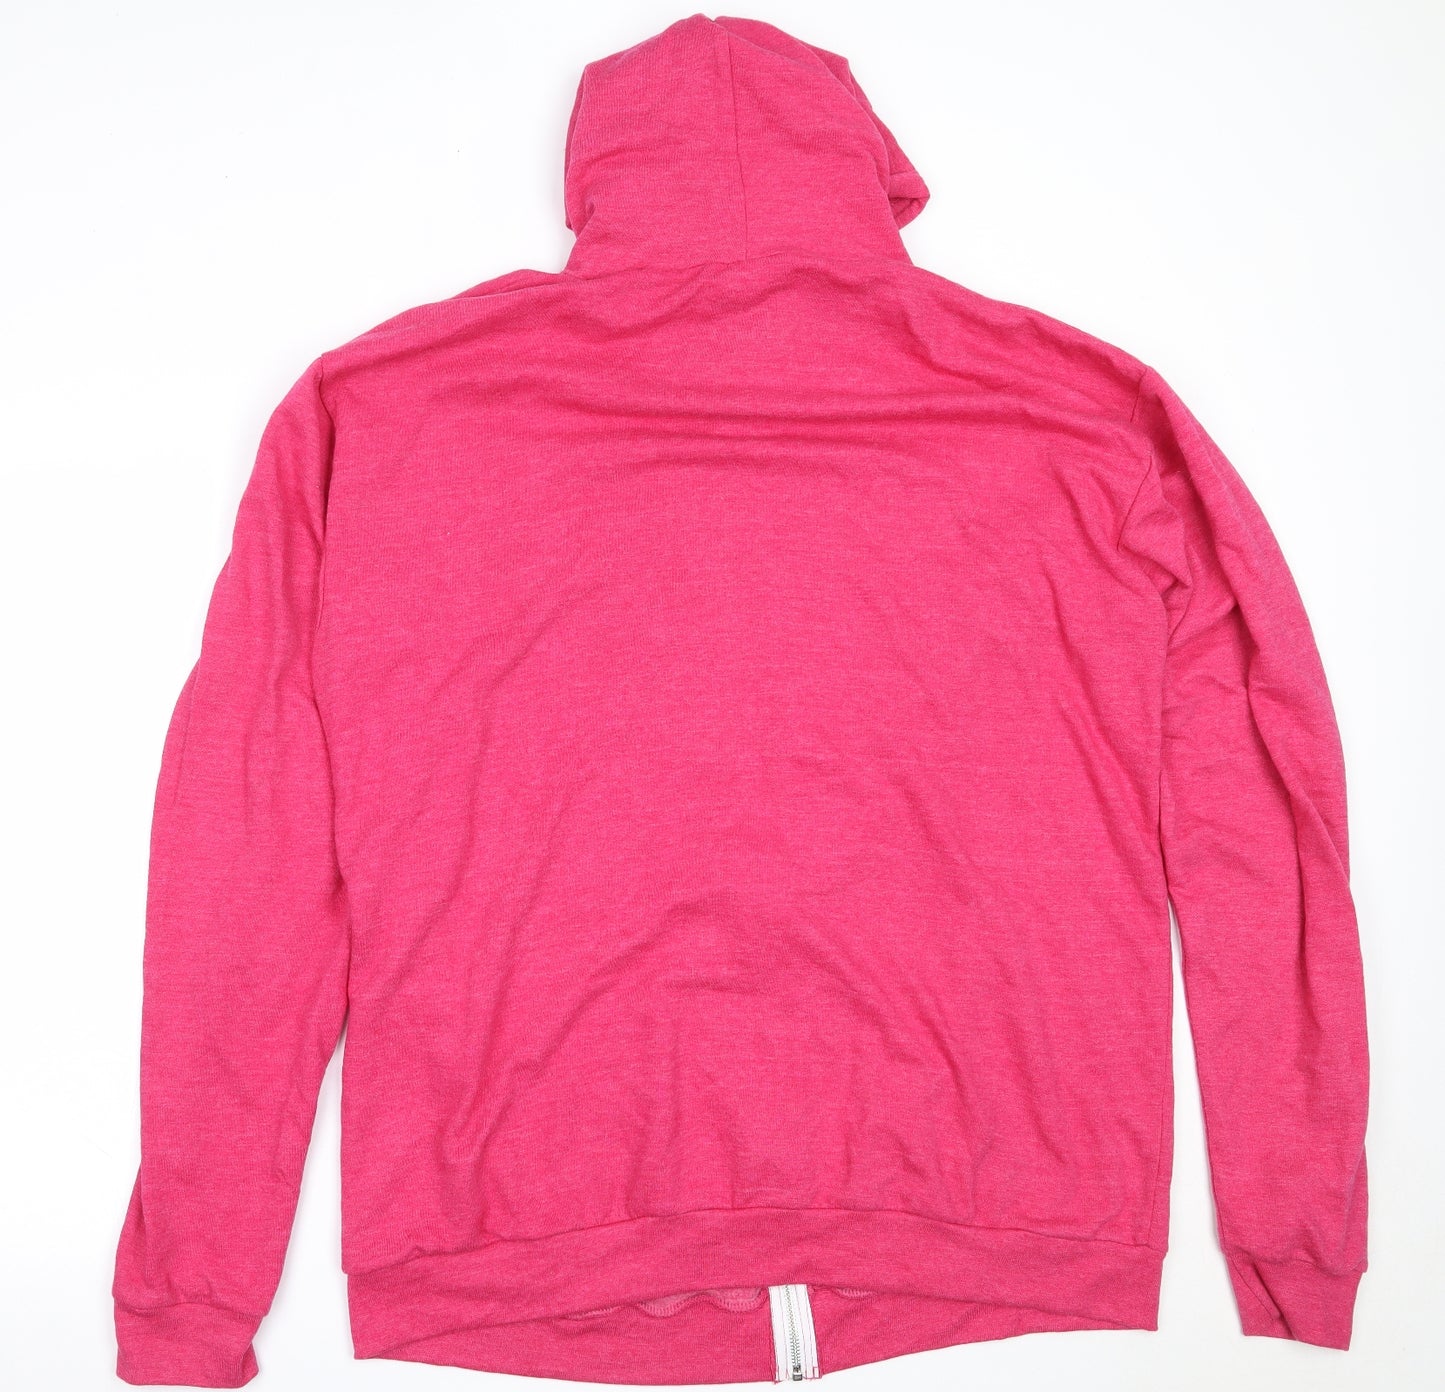 All We Do is Womens Pink  Cotton Full Zip Hoodie Size 2XL